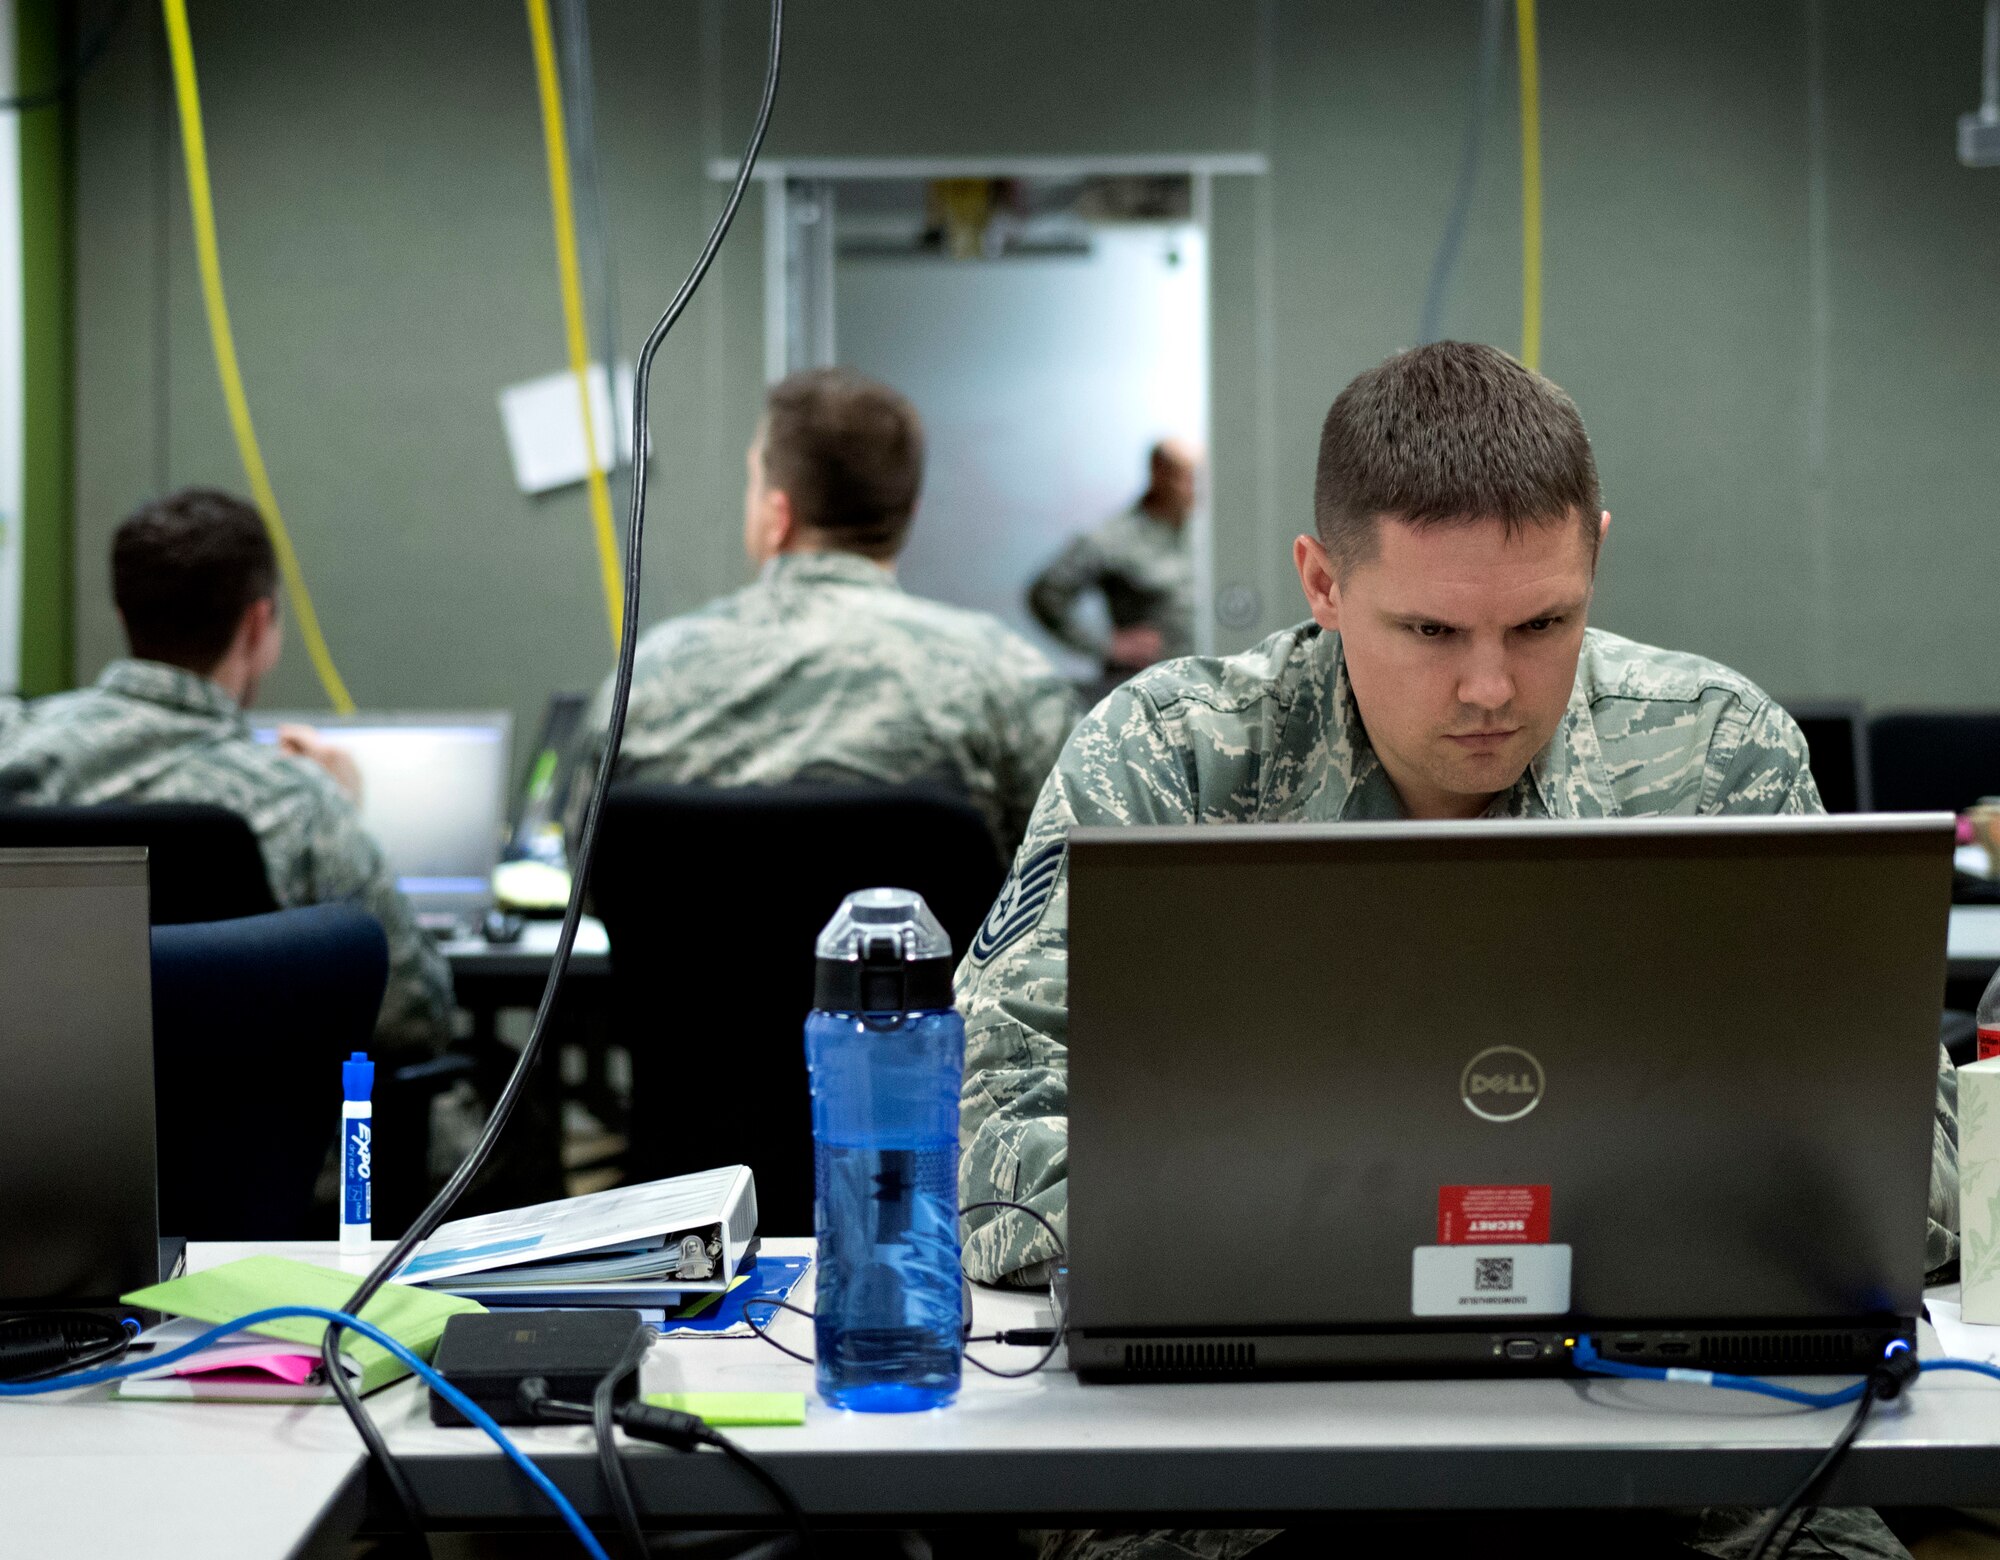 Air Force cyber operators participate in Exercise Black Demon 19-2 at Fort Sam Houston, Texas, May 9, 2019. The two-week-long exercise provided cyber mission forces and cybersecurity service partners an opportunity to demonstrate proficiency in defensive cyber tactics, techniques and procedures against an adversary. The exercise also marked the first time an installation-level mission defense team participated. (U.S. Army photo by Jesus Partida)